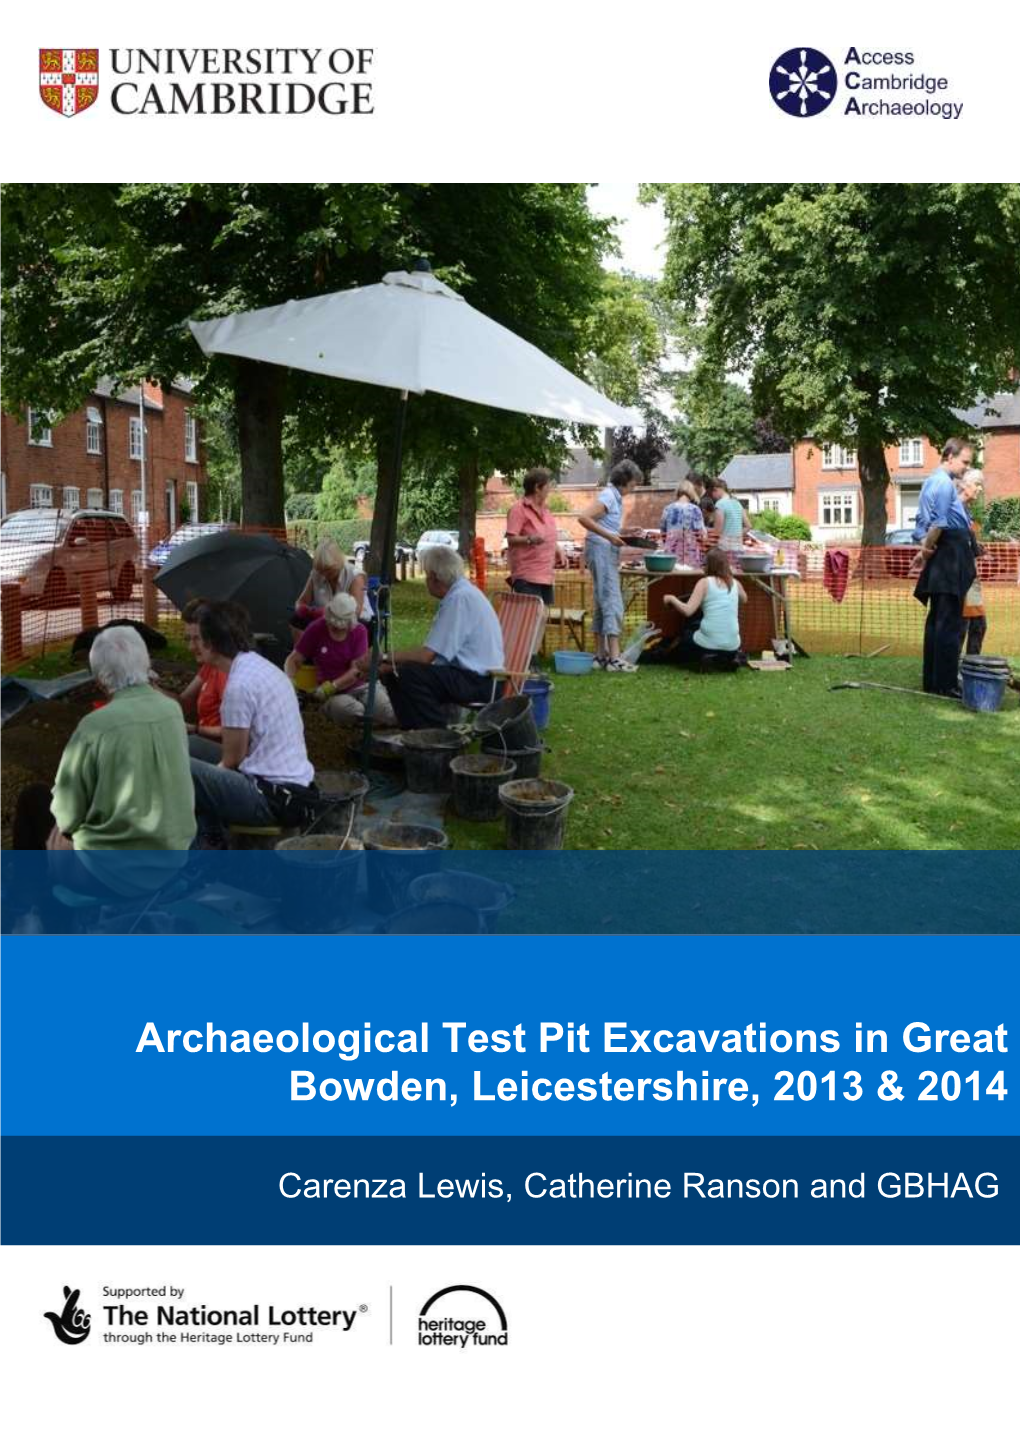 Archaeological Test Pit Excavations in Great Bowden, Leicestershire, 2013 & 2014